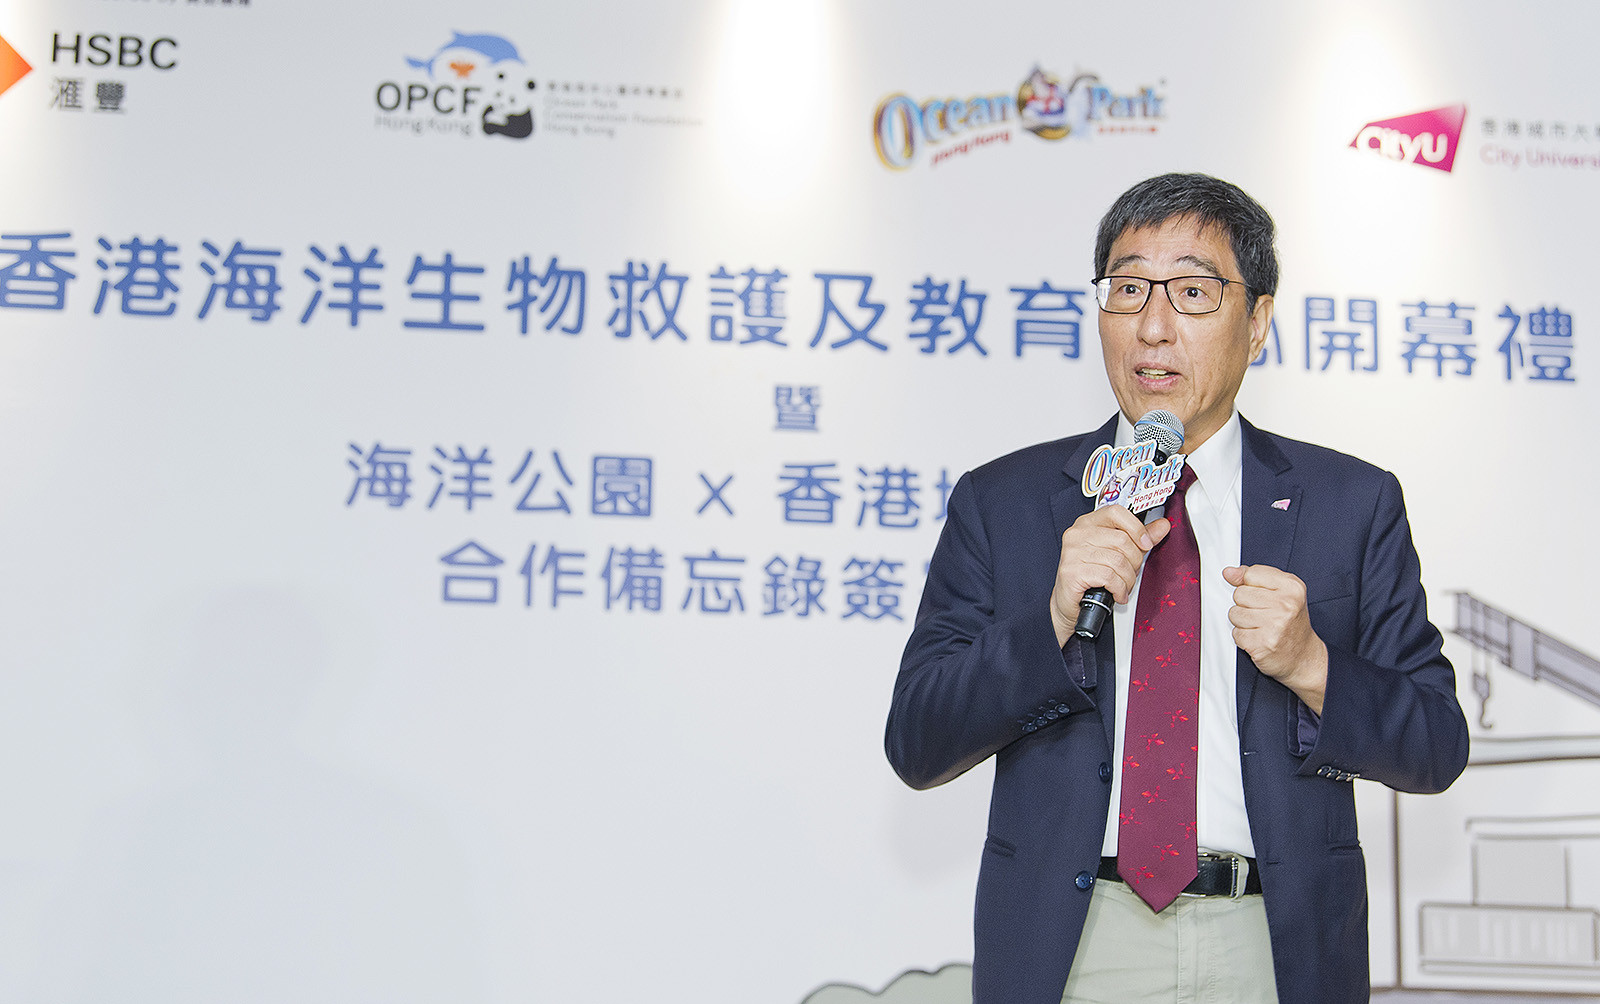 President Kuo says CityU and Ocean Park will share technological achievements with the public under the MOU.